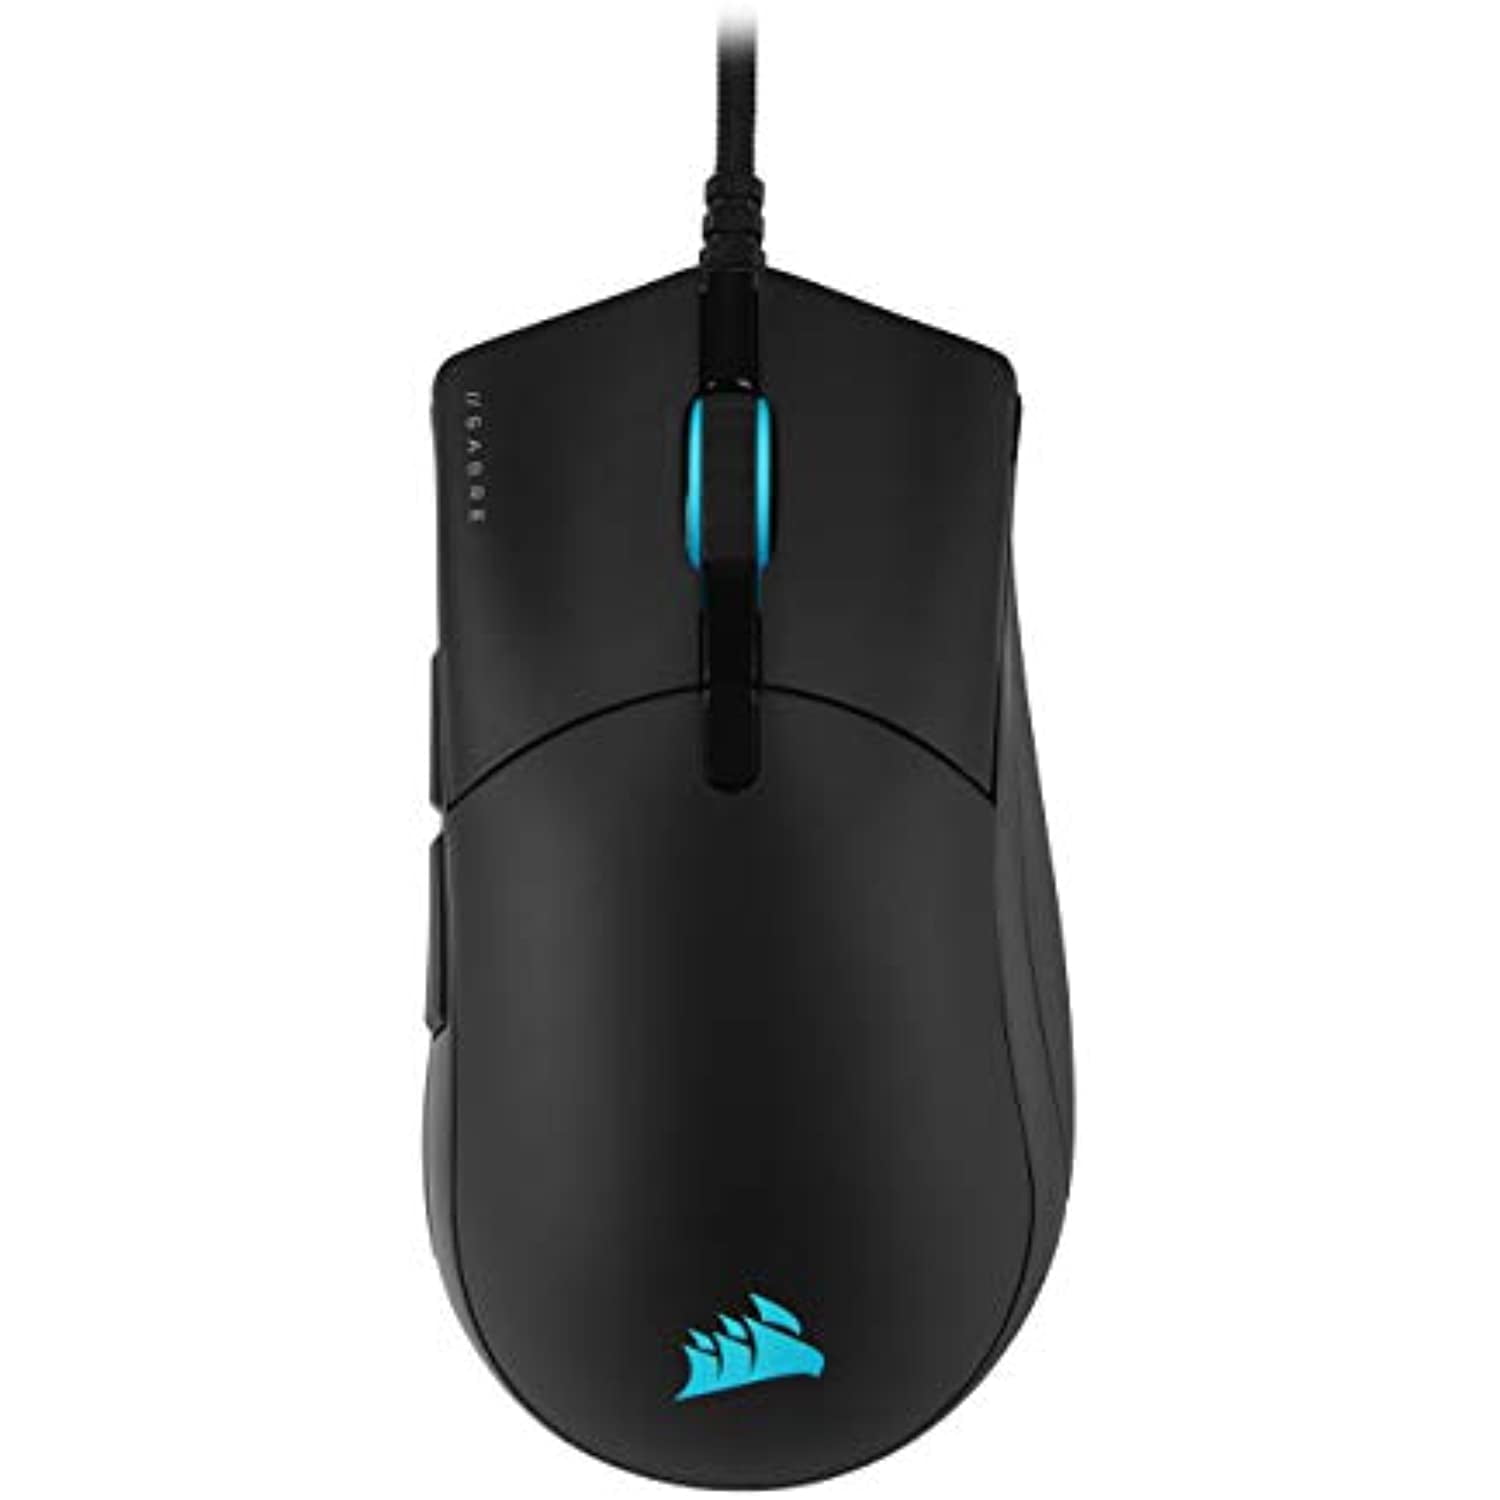 Corsair Sabre Rgb Pro Champion Series Gaming Mouse - Ergonomic Shape For Esports And Competitive Ultra-Lightweight 74G - Flexible Paracord Cable - Walmart.com